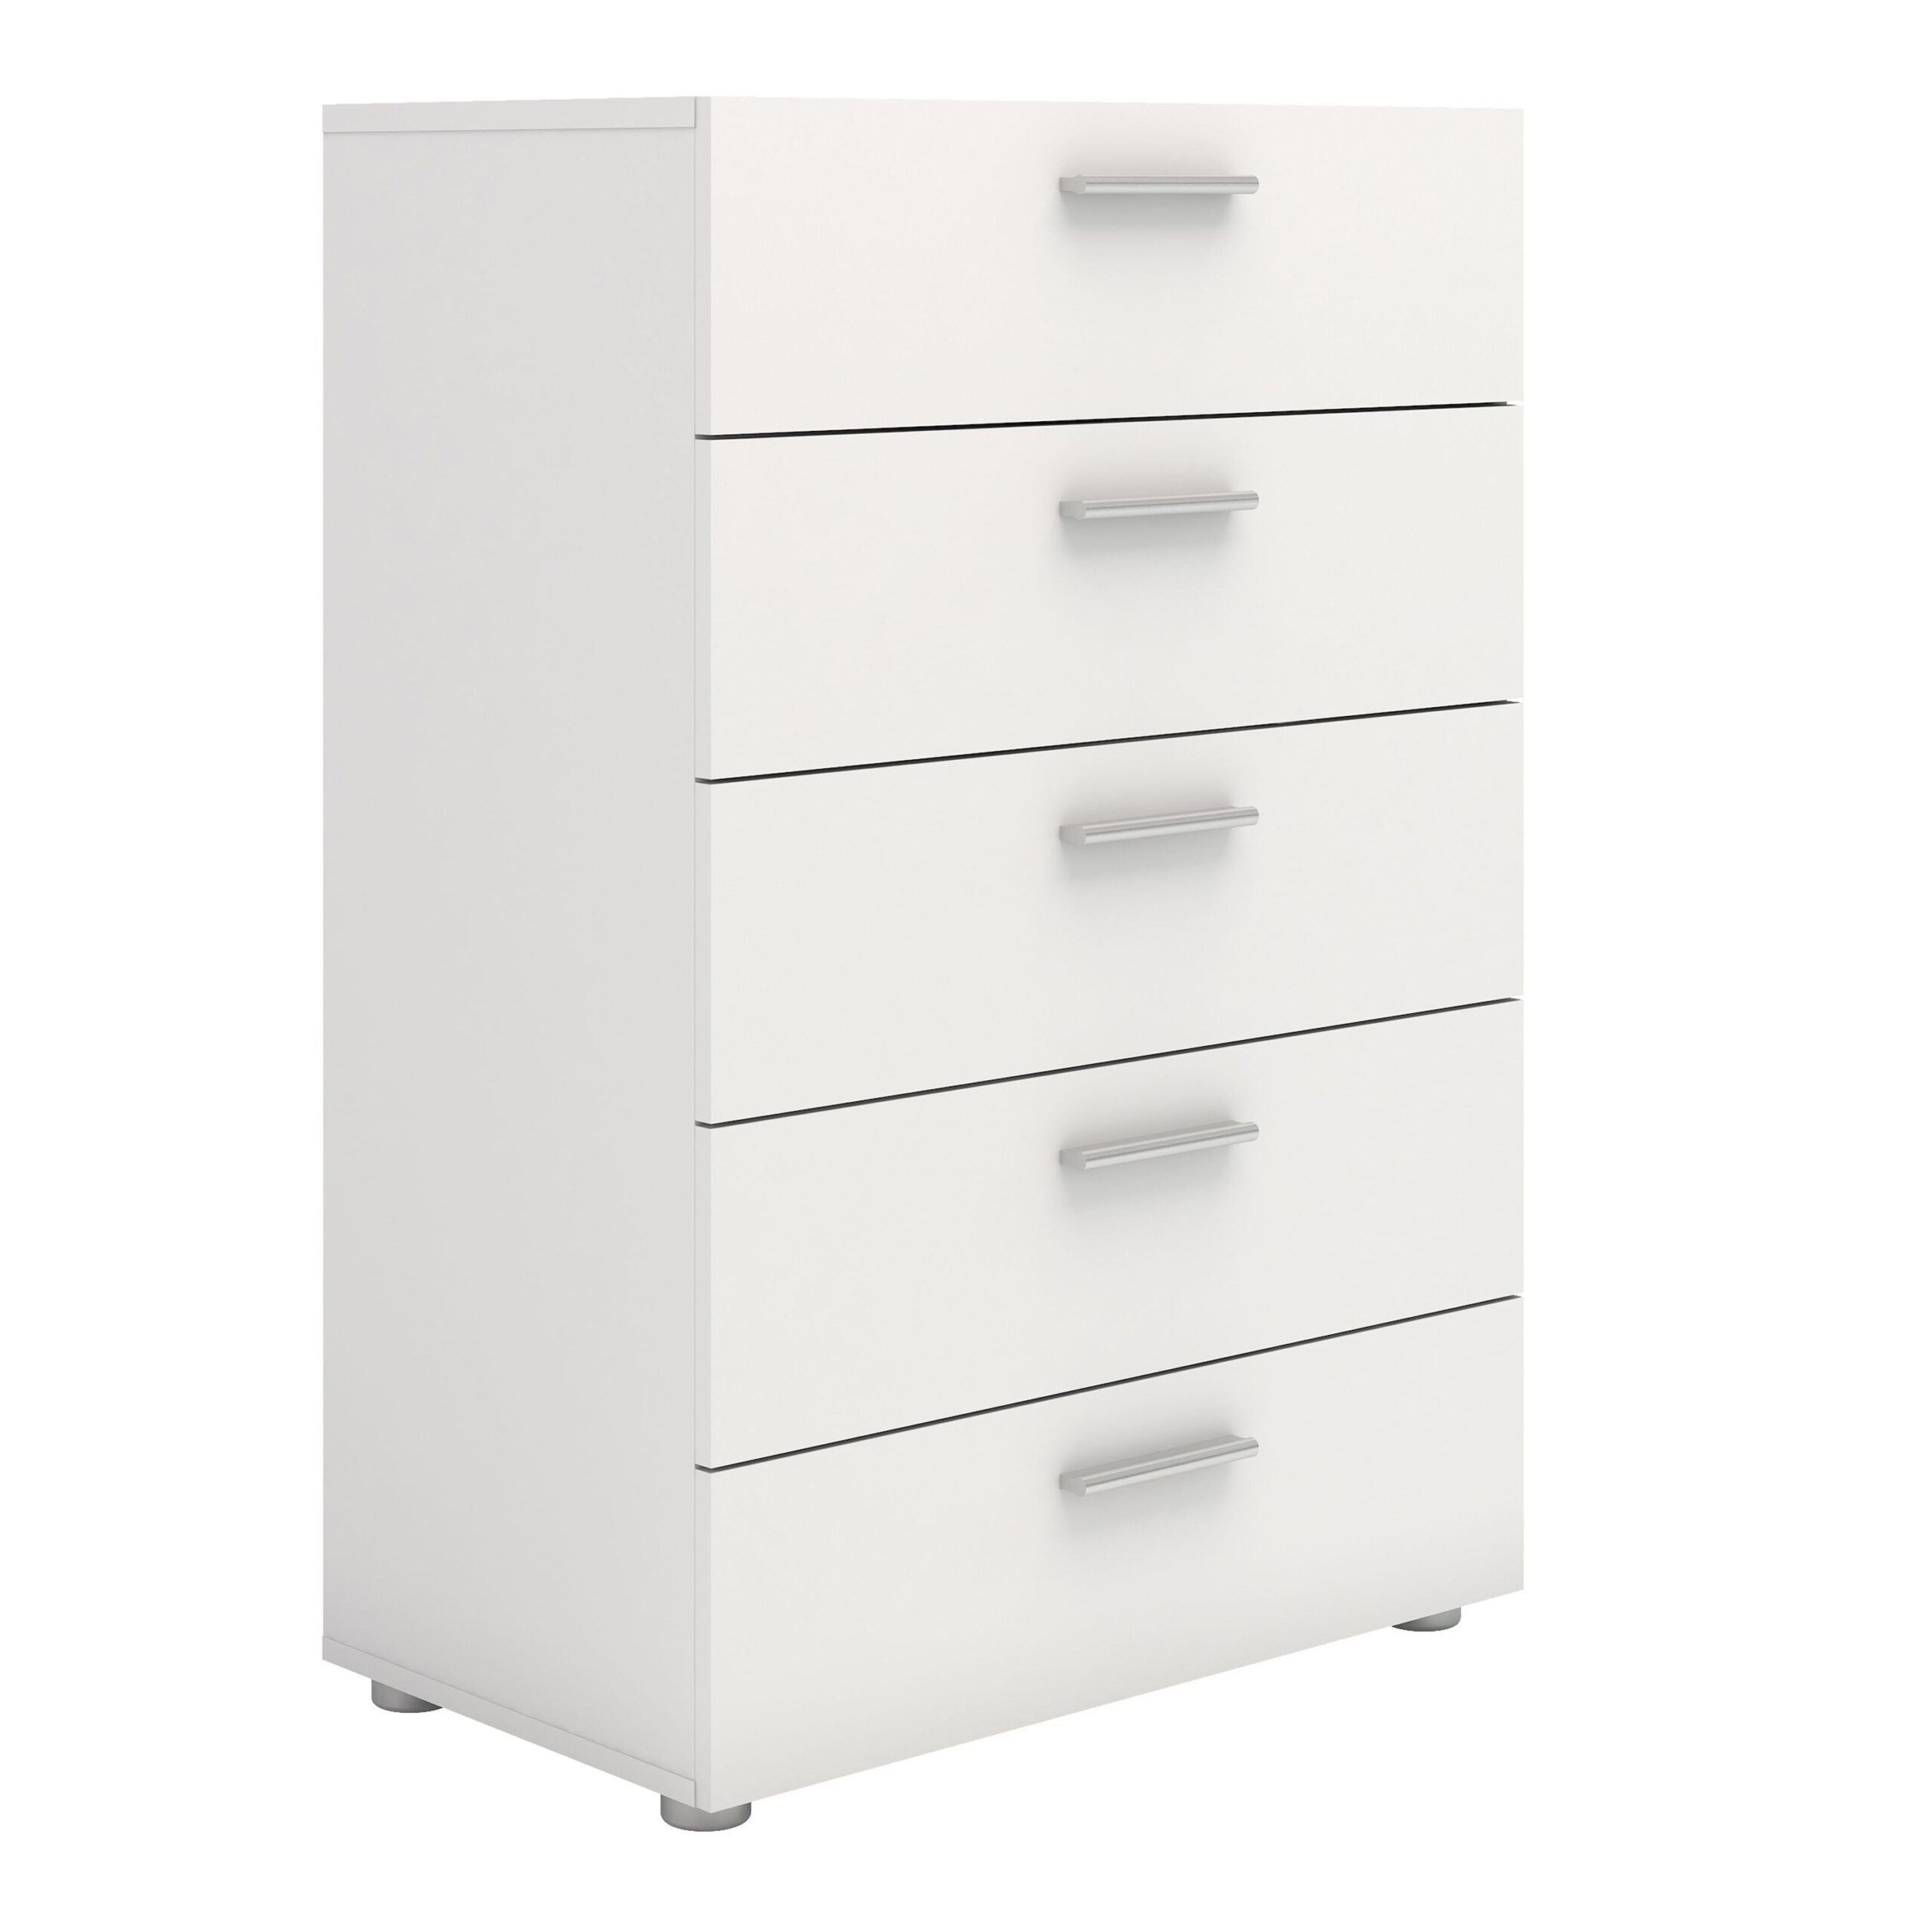 Peepo Chest Of 5 Drawers In White